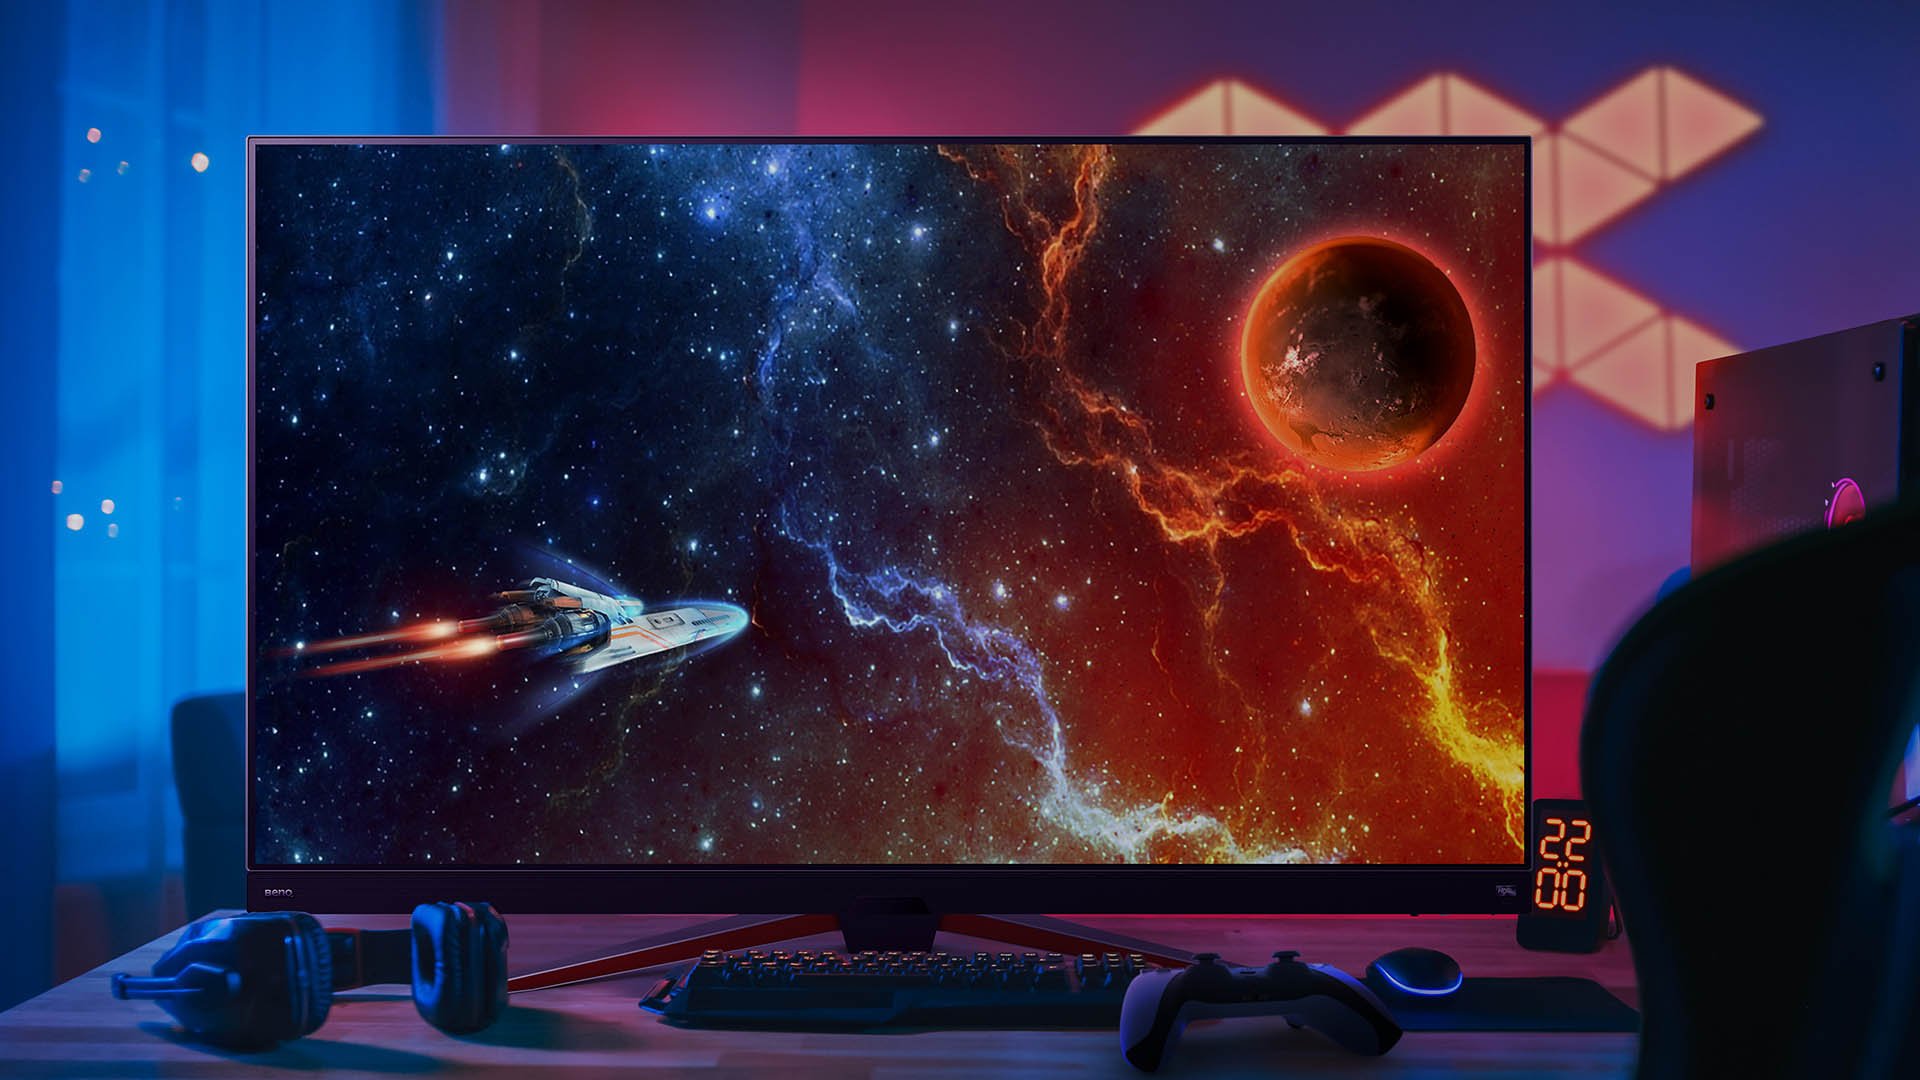 BenQ OLED monitors have Off-RS compensation JB maintenance Orbit feature to reduce wear and tear to help extend their lifespan and protect against burn-in BenQ Eye-Care technology protects gamer’s eyes from damage during lengthy play sessions